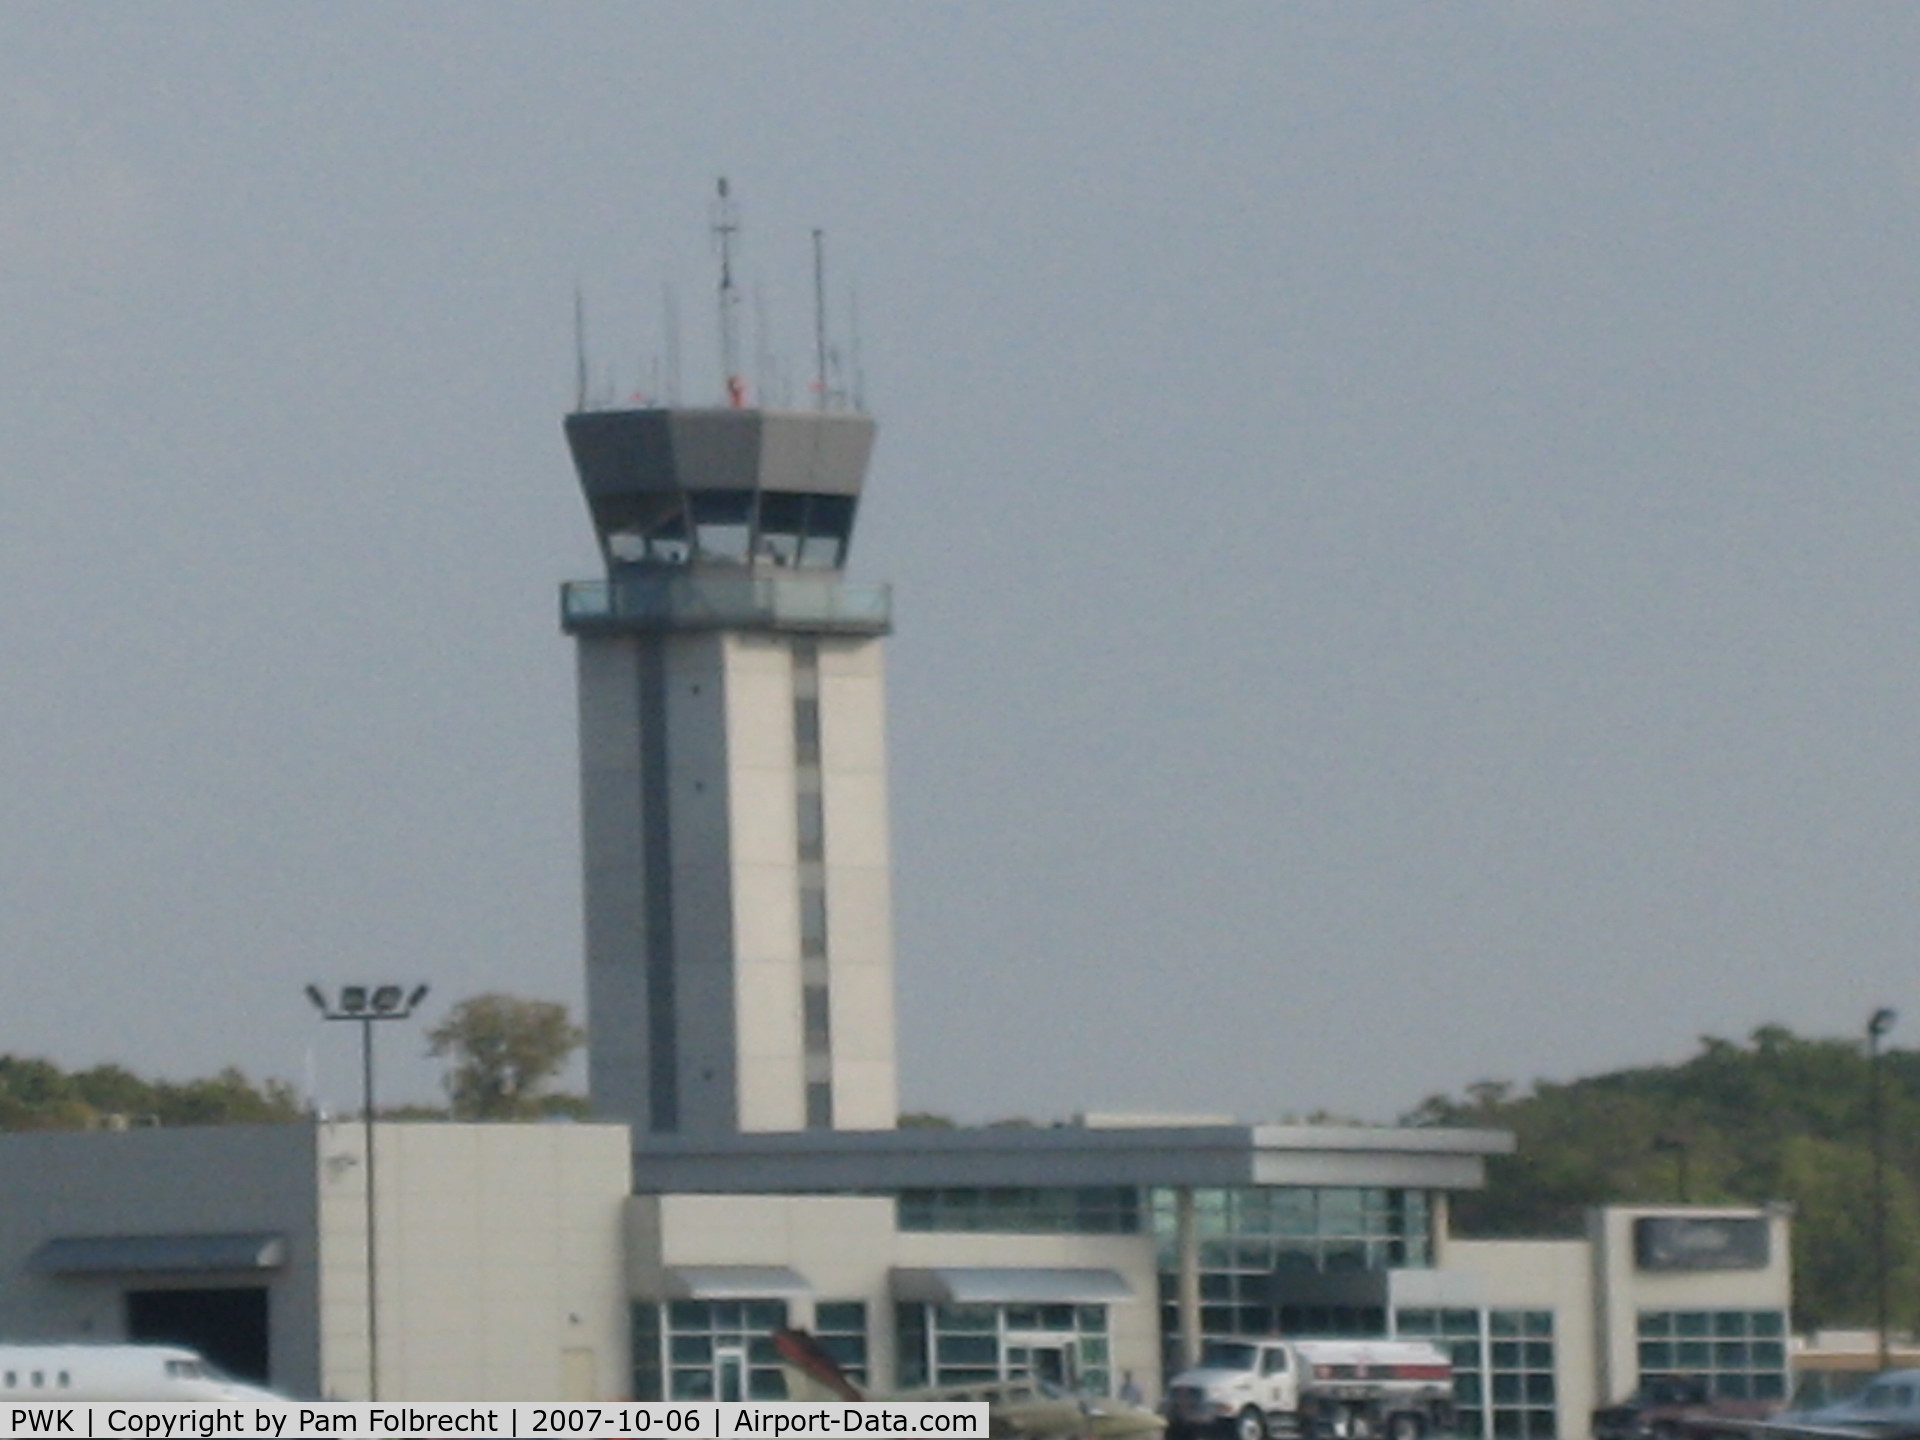 Chicago Executive Airport (PWK) - PWK Tower